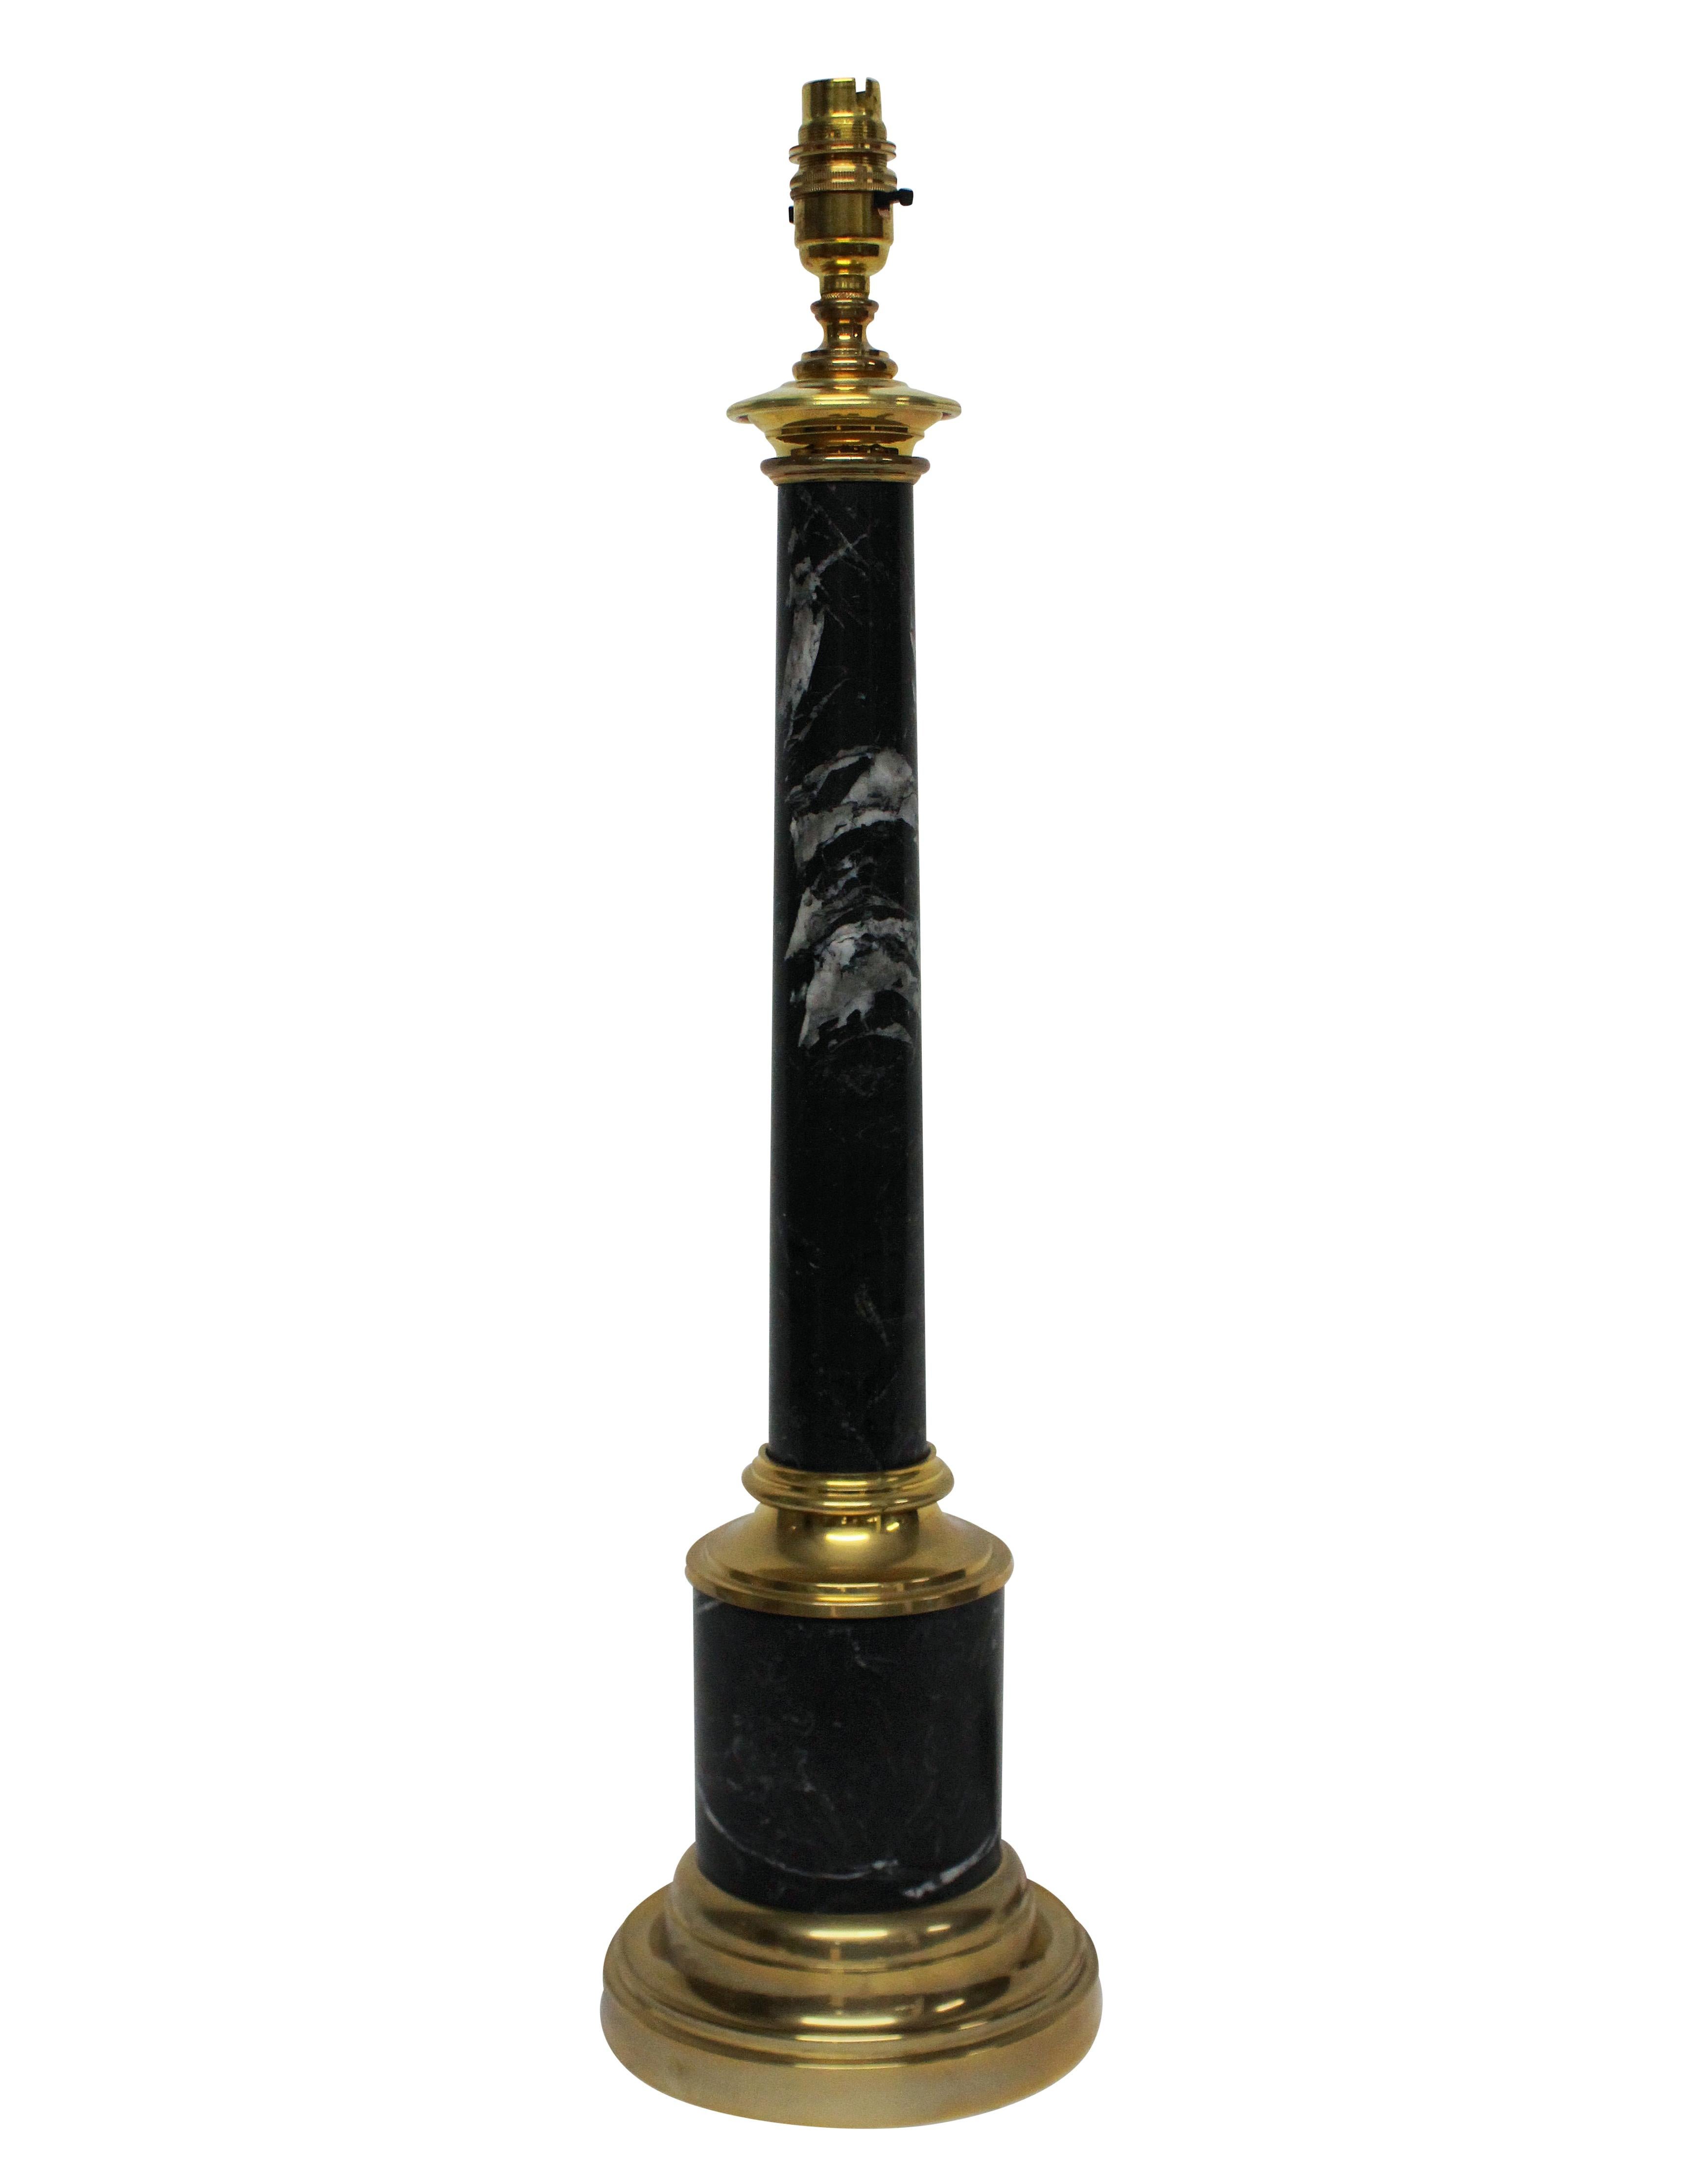 A pair of Italian column lamps in grey Tuscan marble, with gold-plated metal work.